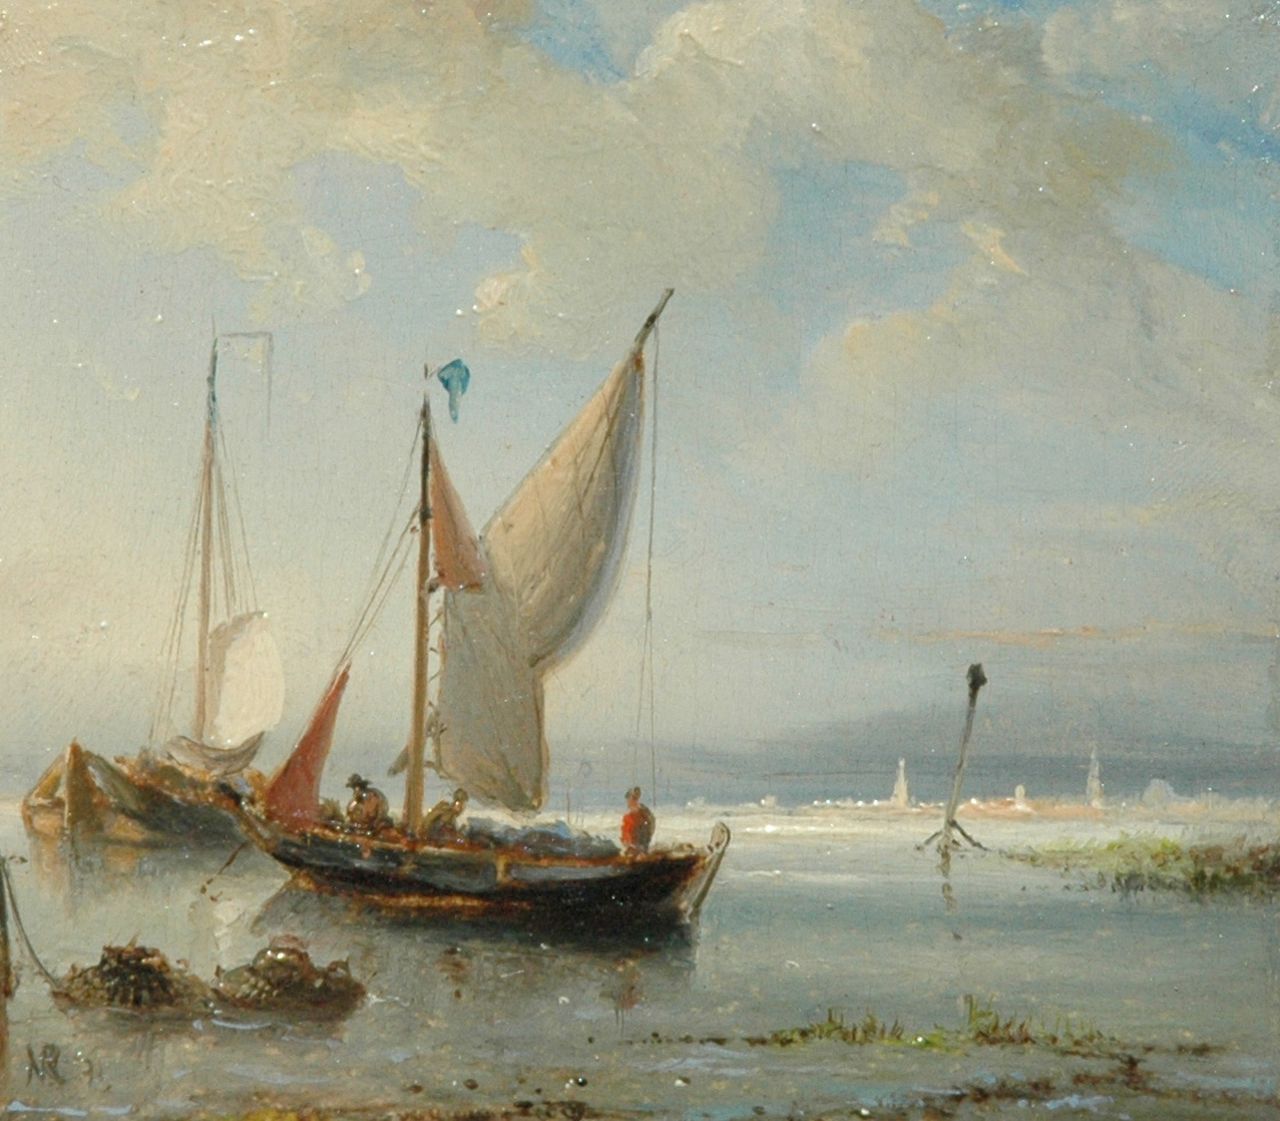 Riegen N.  | Nicolaas Riegen, Fishing boats on calm water, oil on panel 9.2 x 10.2 cm, signed l.l. with initials and dated '71